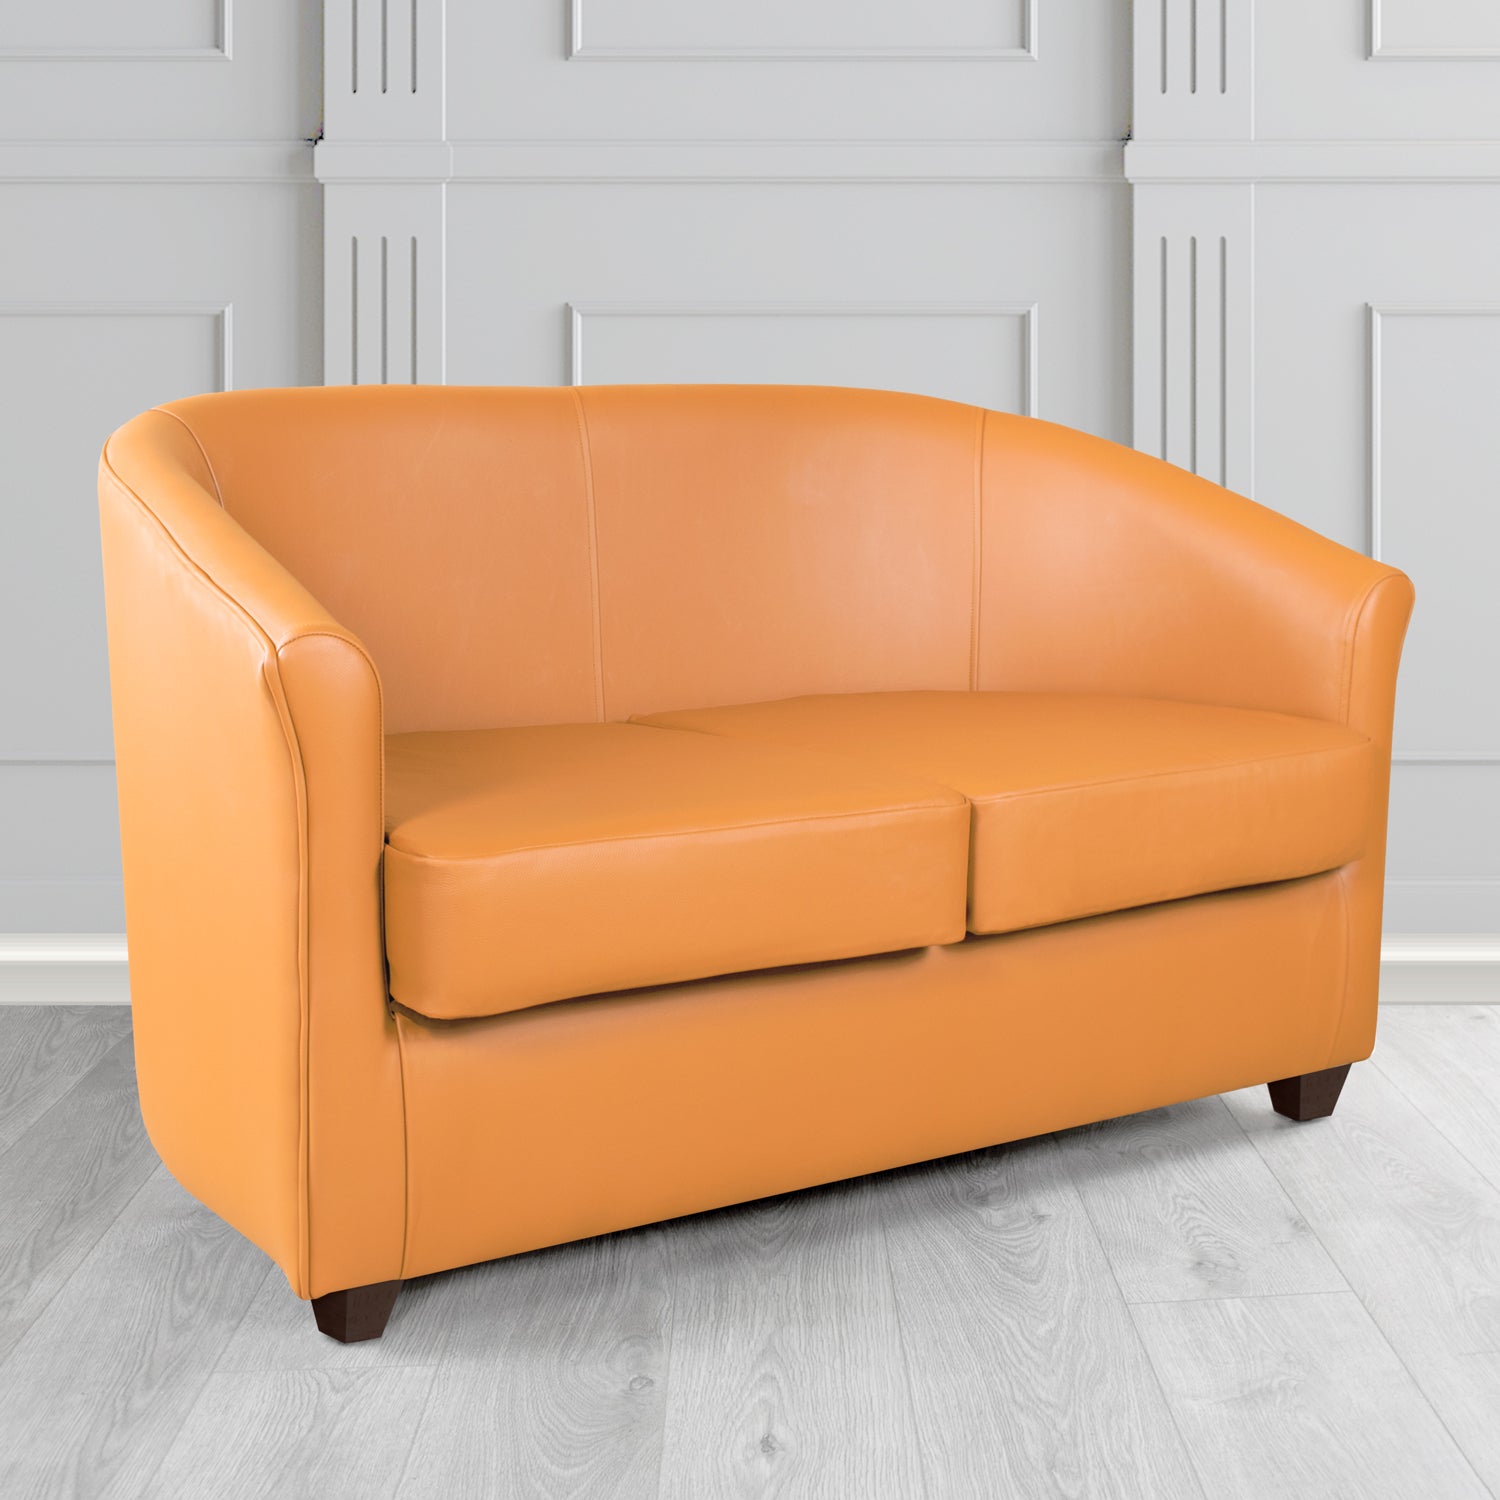 Cannes 2 Seater Tub Sofa in Just Colour Tangerine Crib 5 Faux Leather - The Tub Chair Shop